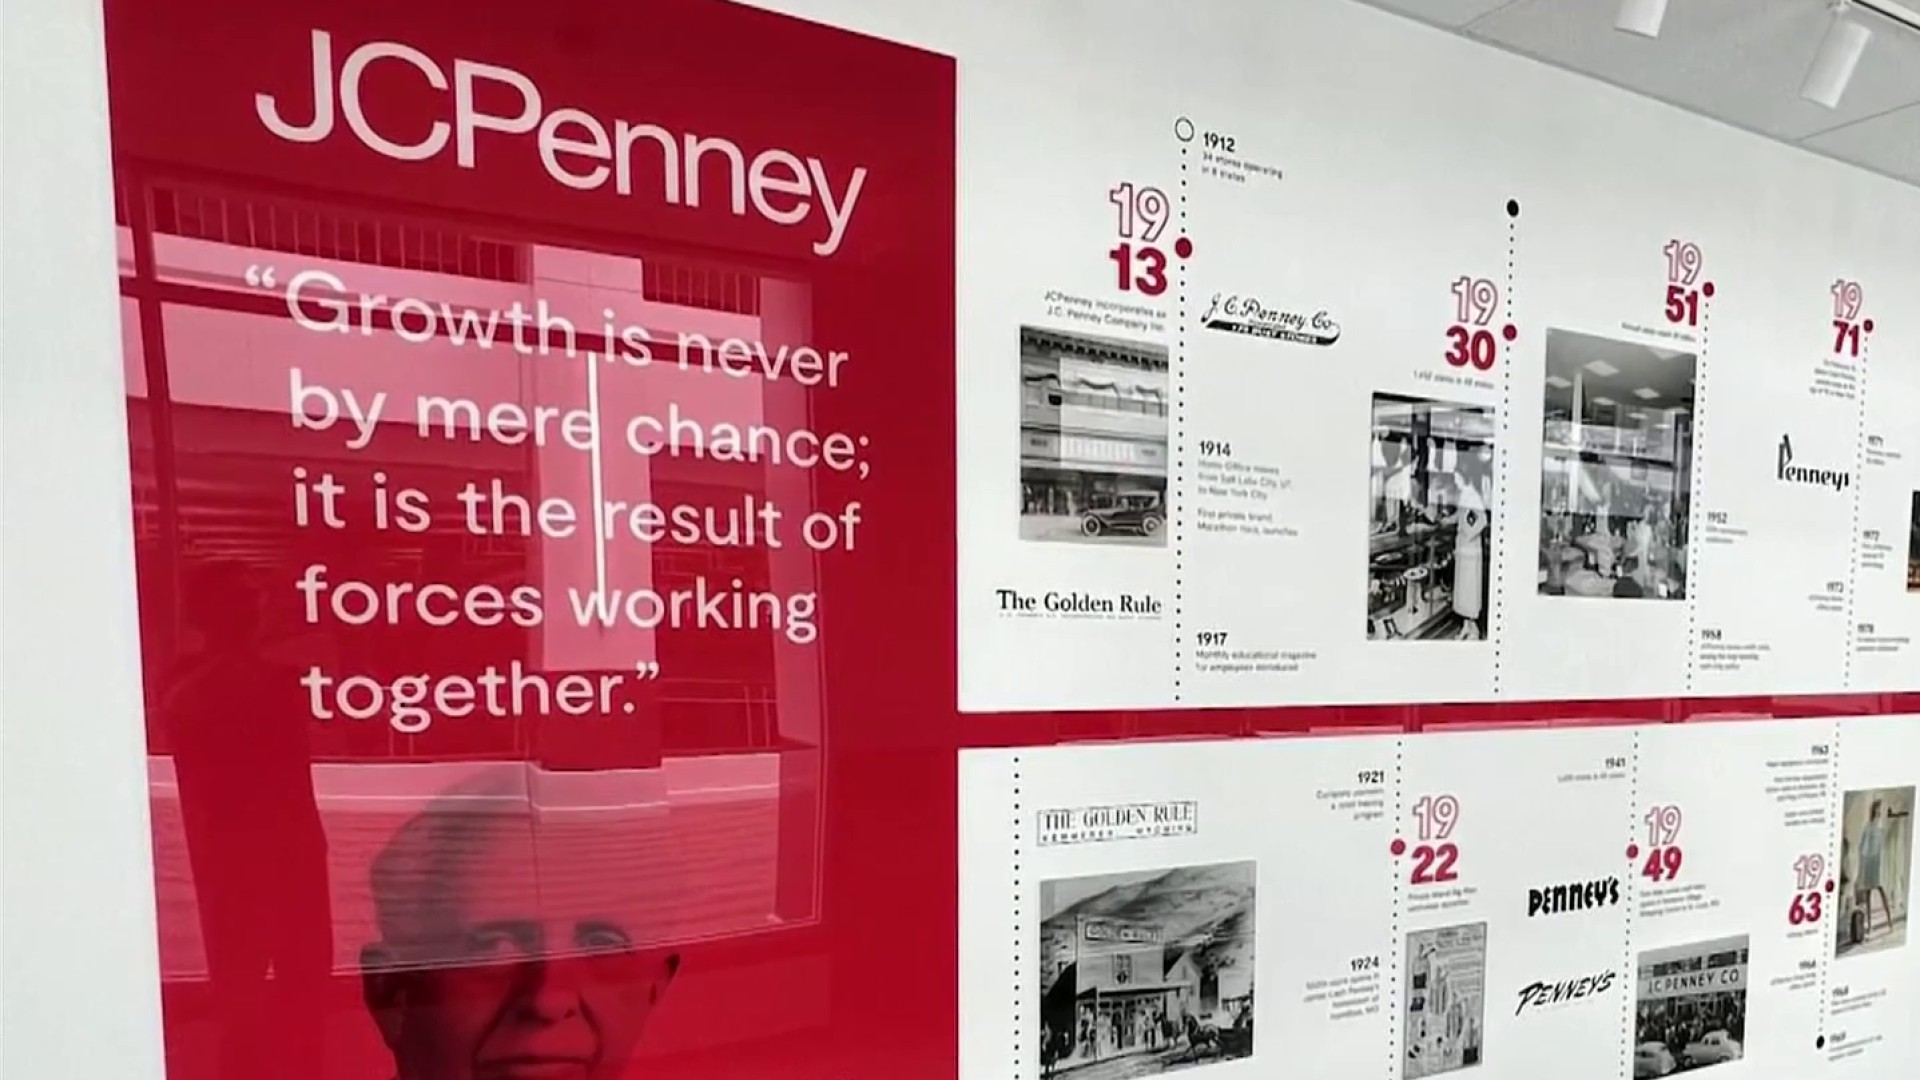 JCPenney Returns to its Plano HQ After a $10 Million Renovation